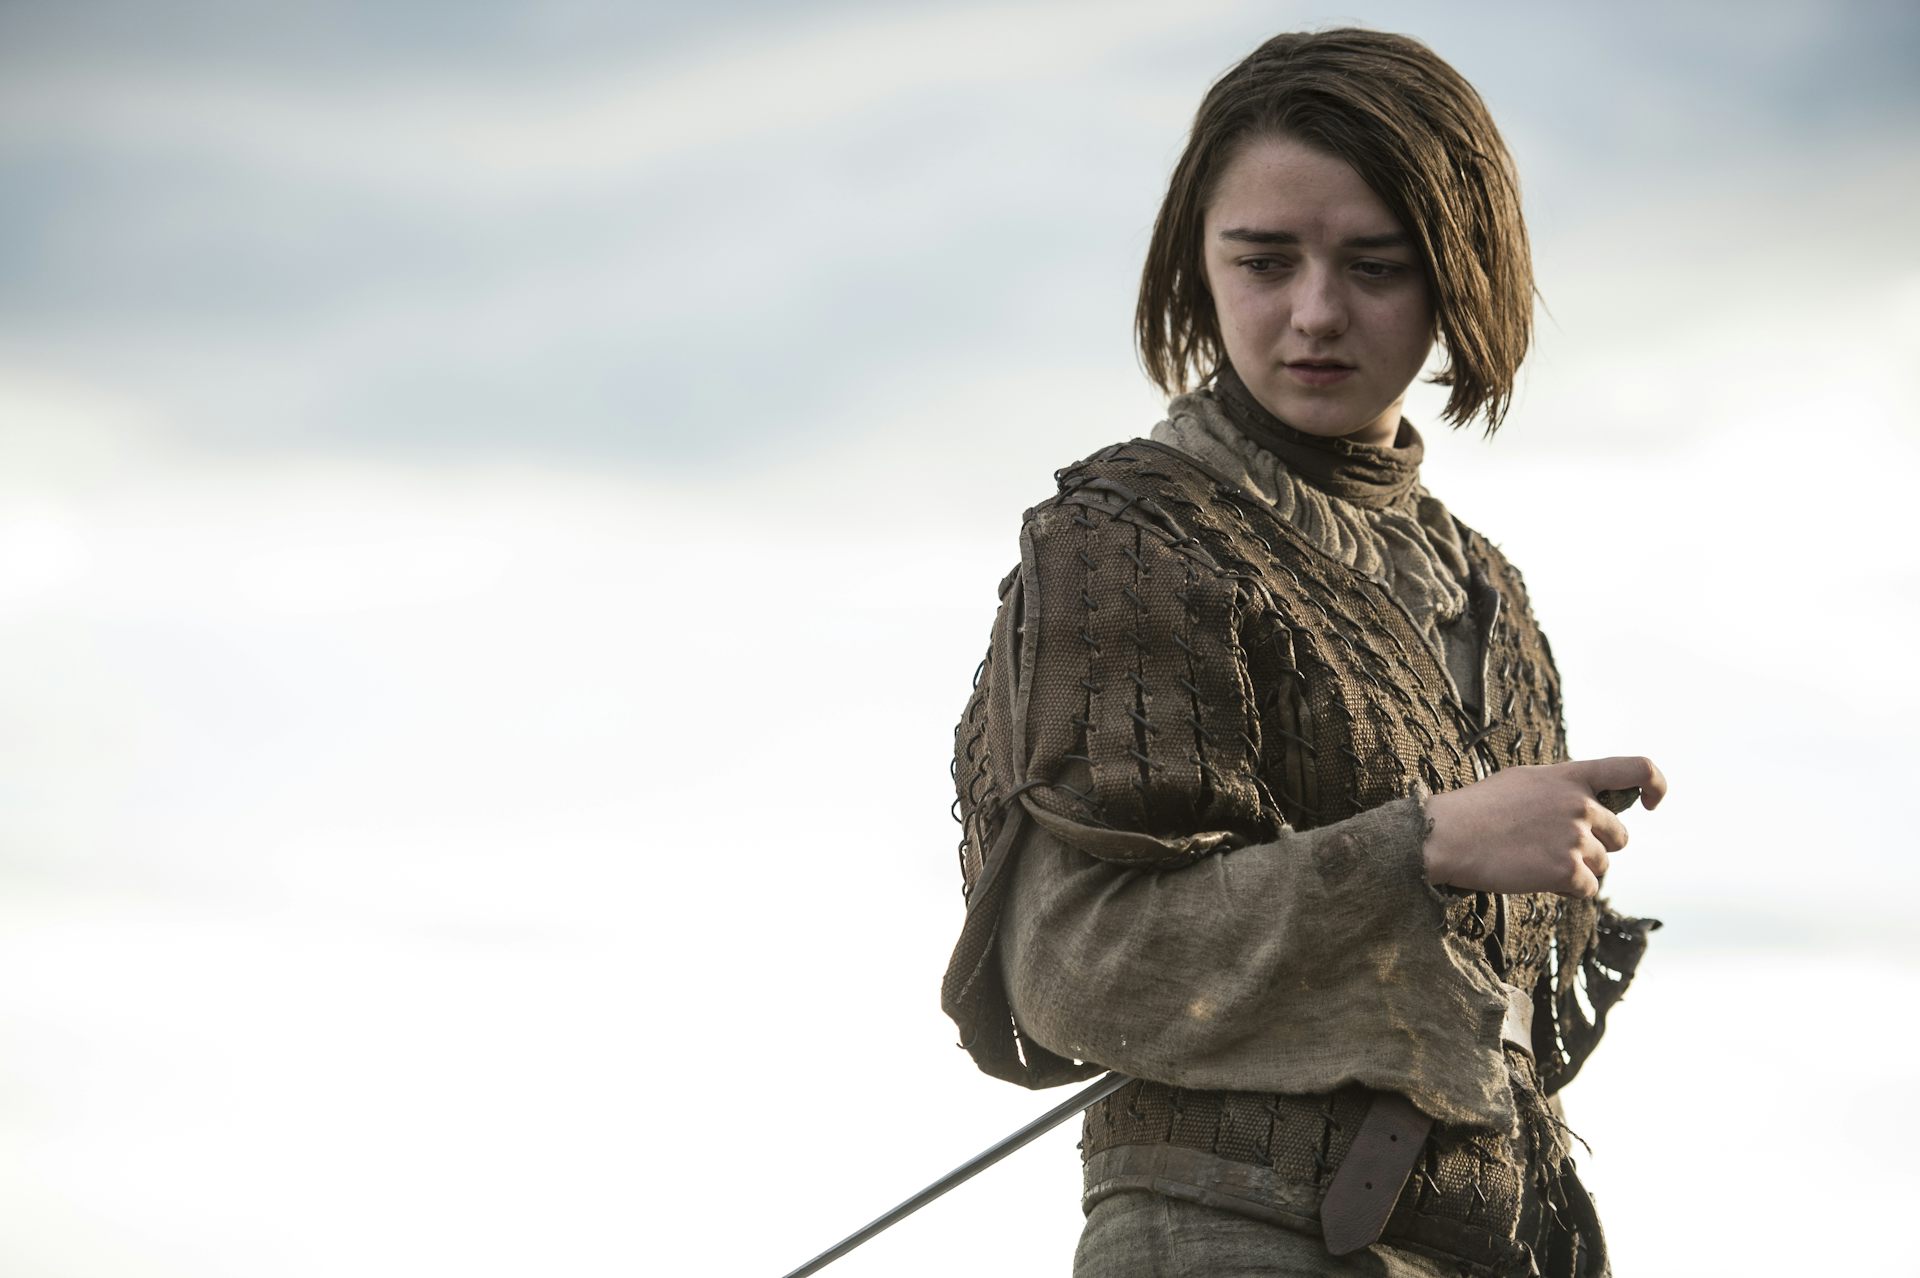 Maisie Williams Killed It With the BestWorst April Fools Joke EVER